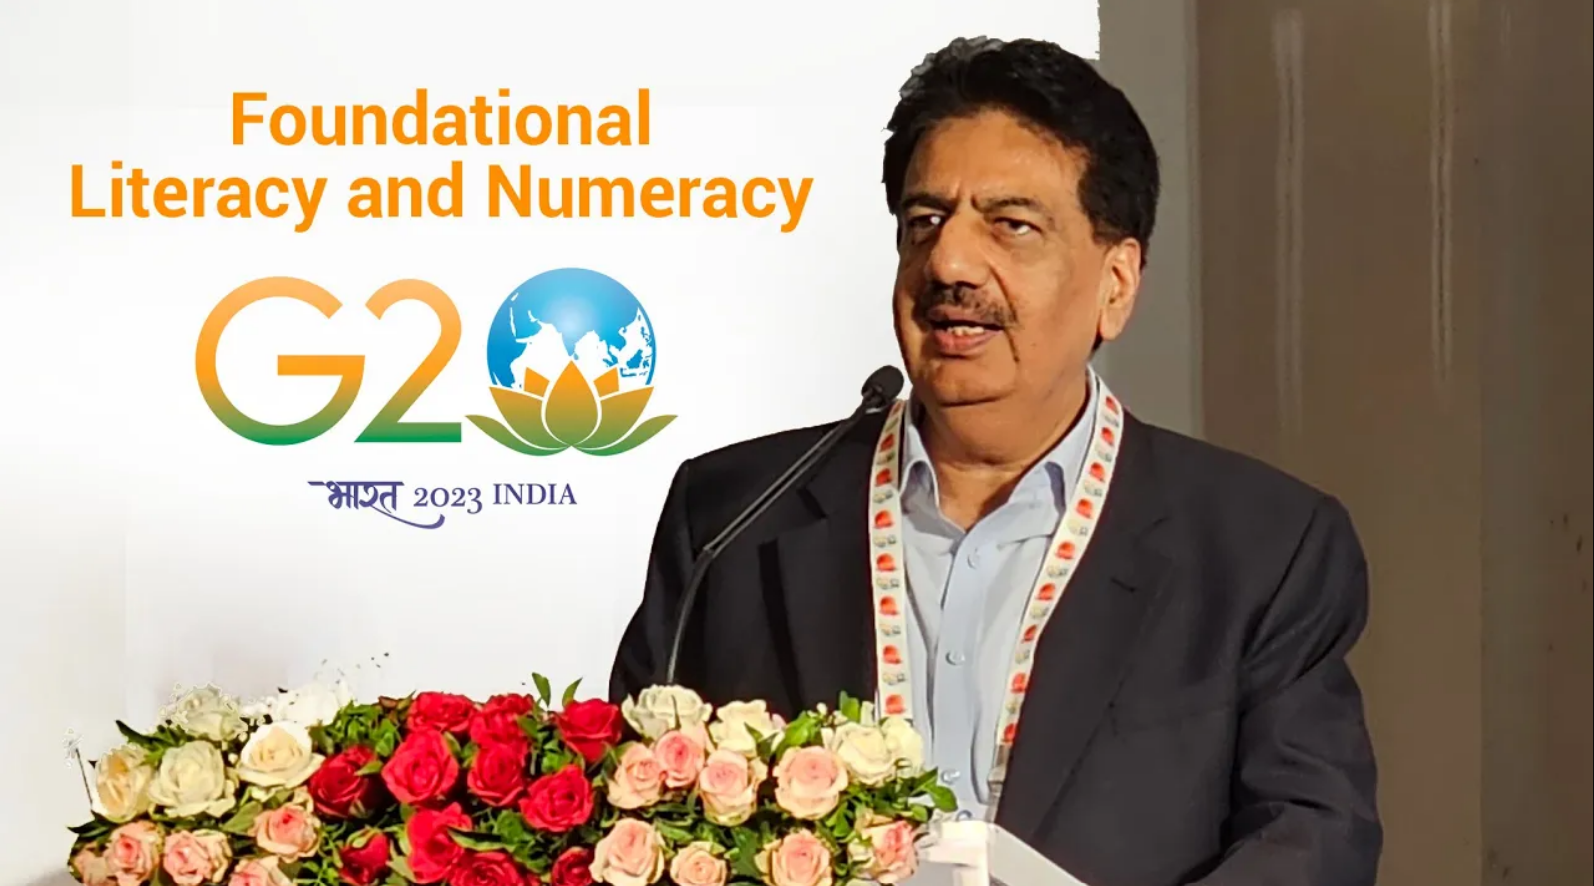 Reskilling 1 Cr teachers through learnings from Indian IT industry - Vineet Nayar at G20 (EdWG) 2023